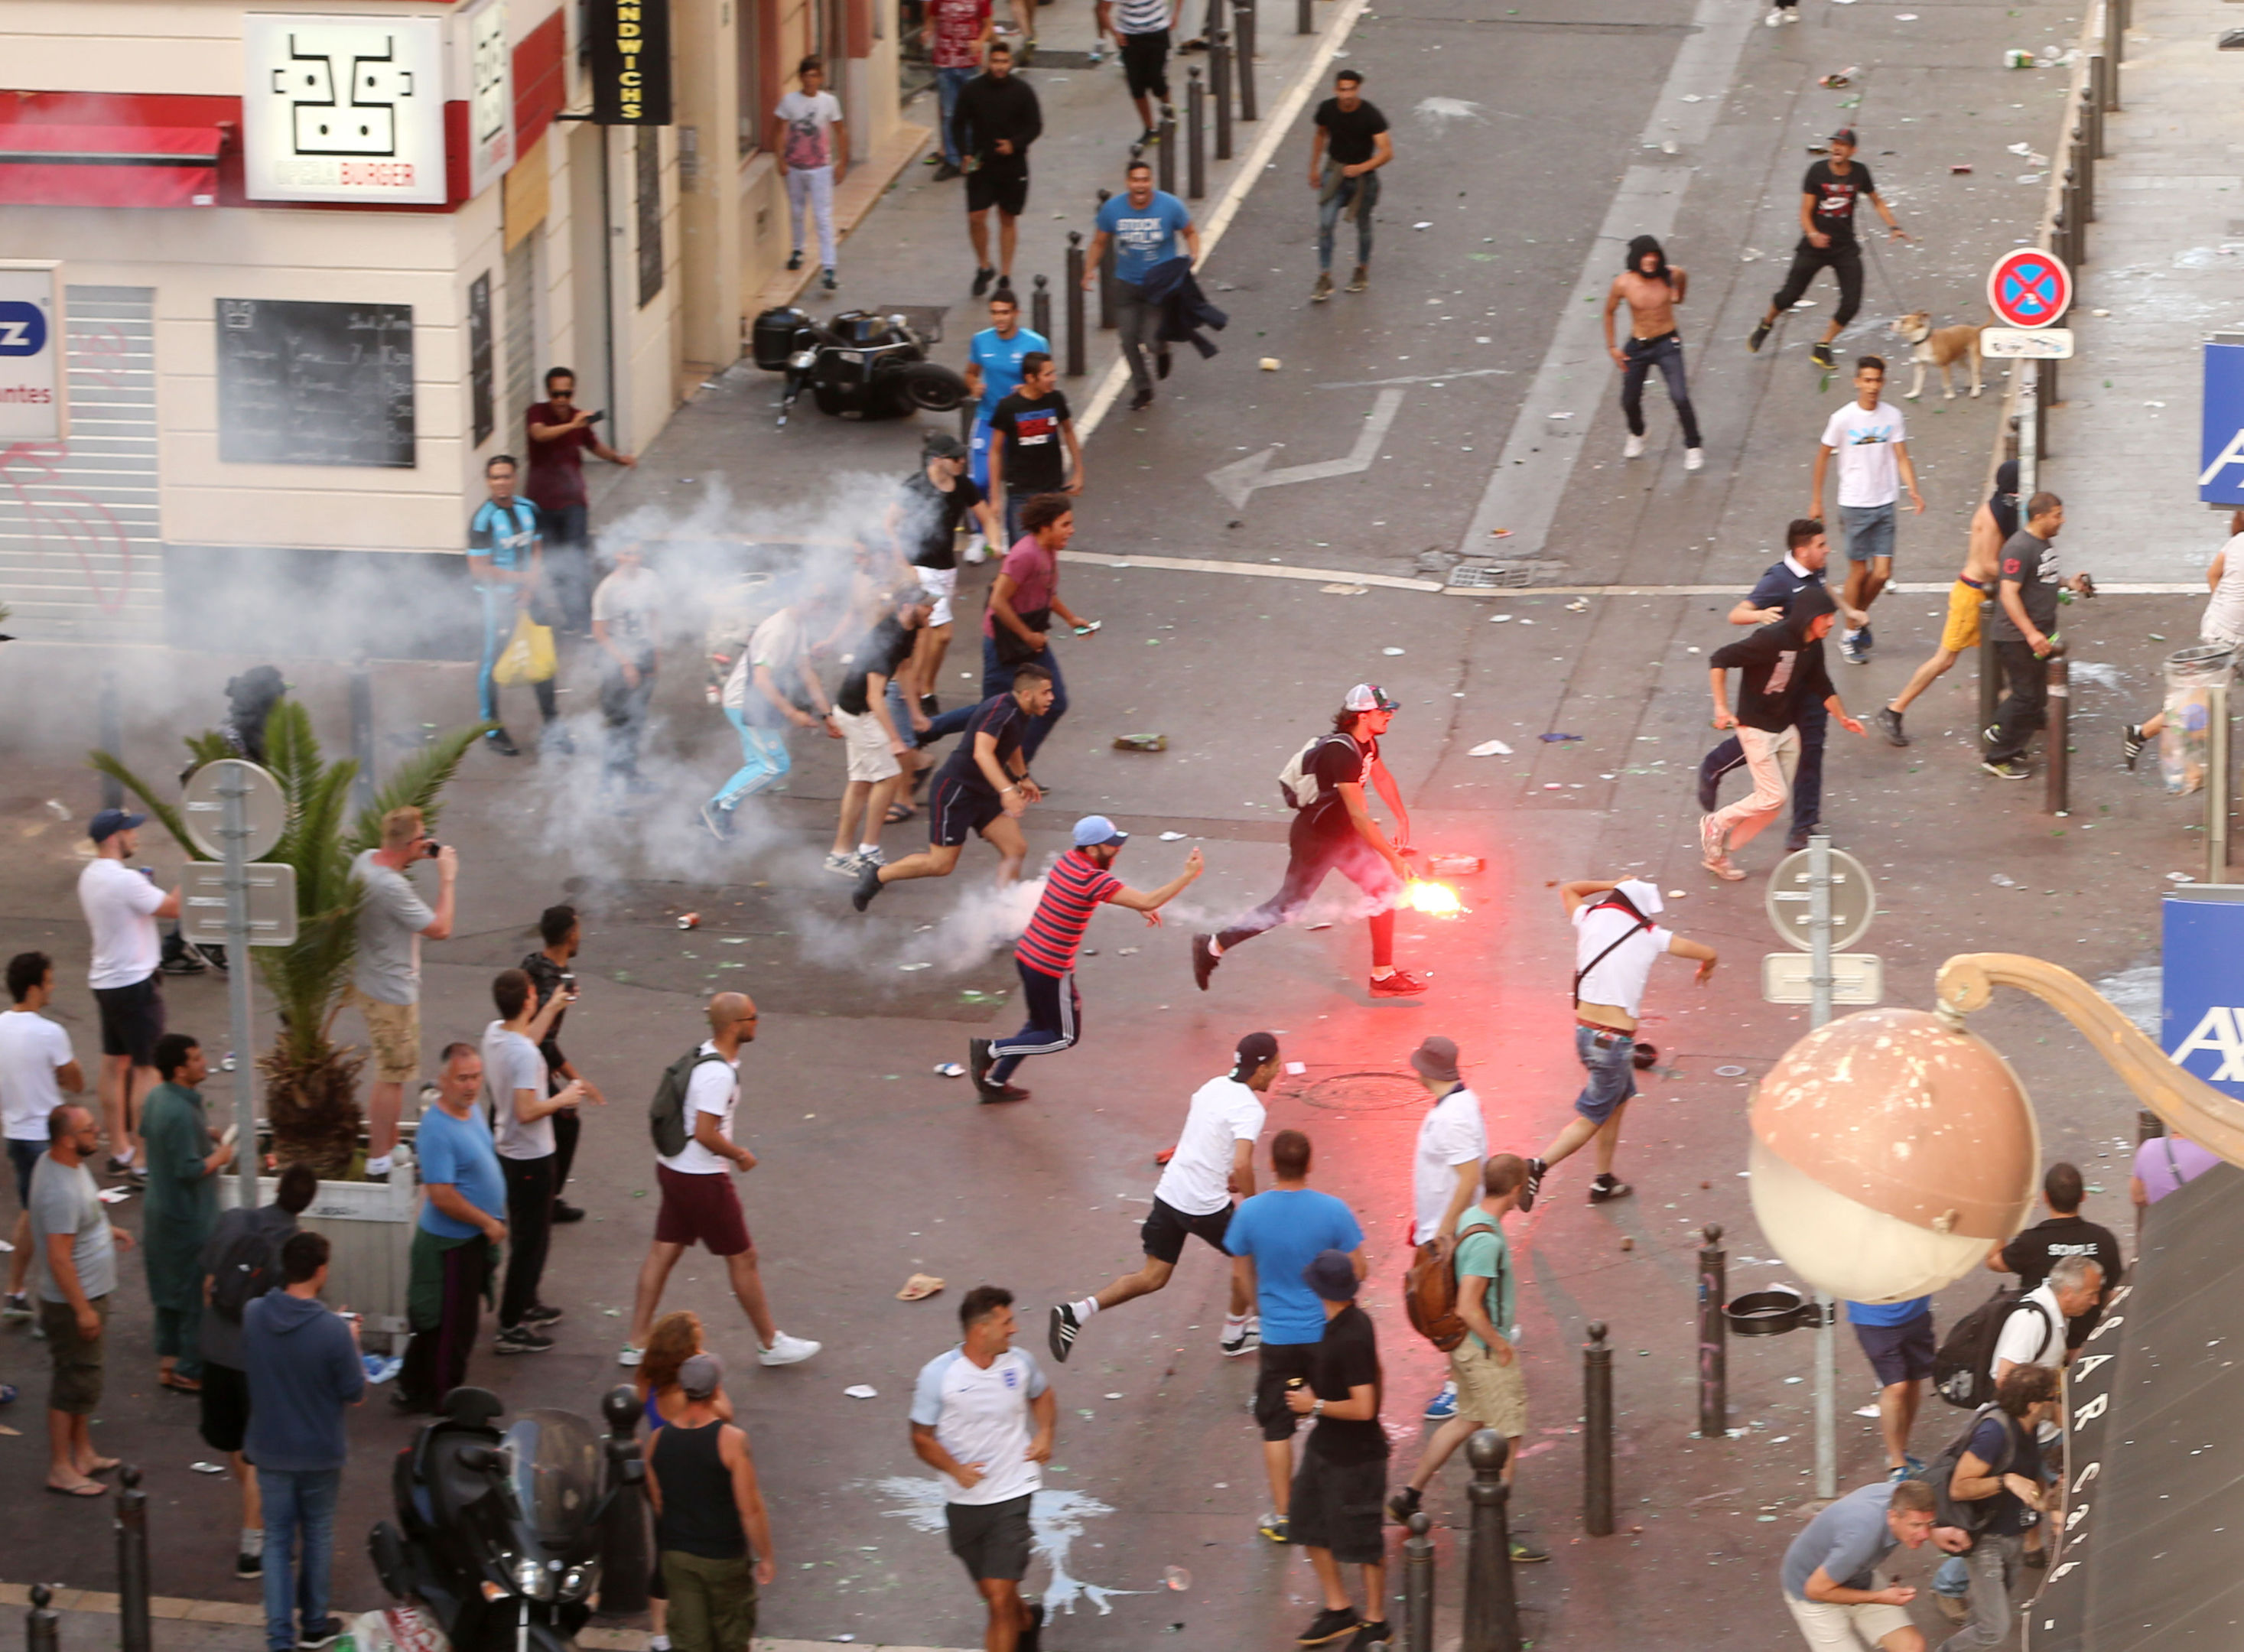 A fan runs with a flare ahead of the England vs Russia France Euro 2016 match, in Marseille, France (Niall Carson/PA)